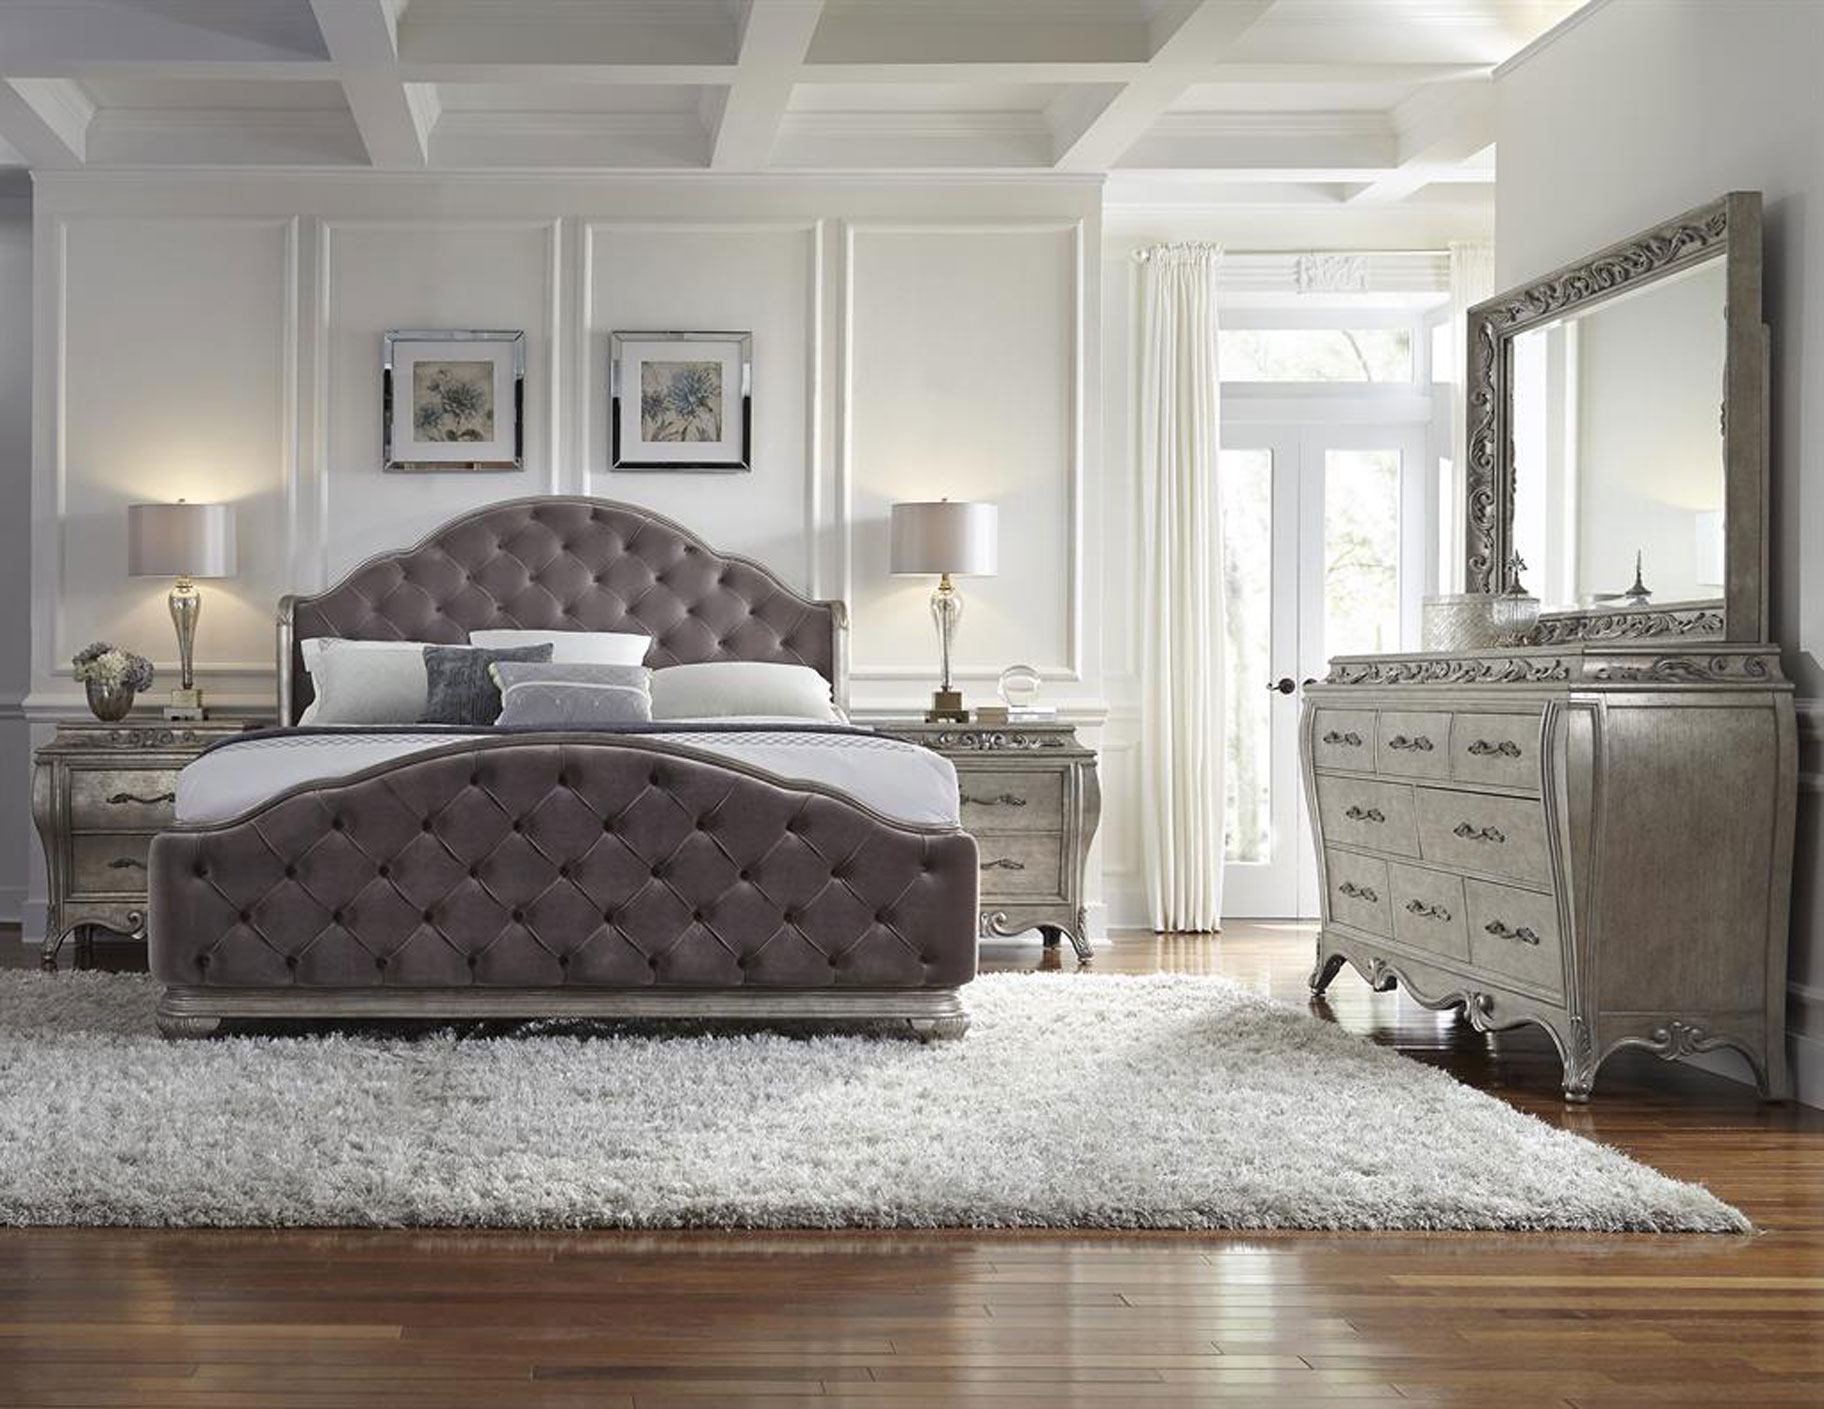 Decoration Remarkable Tufted Bedroom Sets For Enhance Your Awesome inside proportions 1824 X 1409